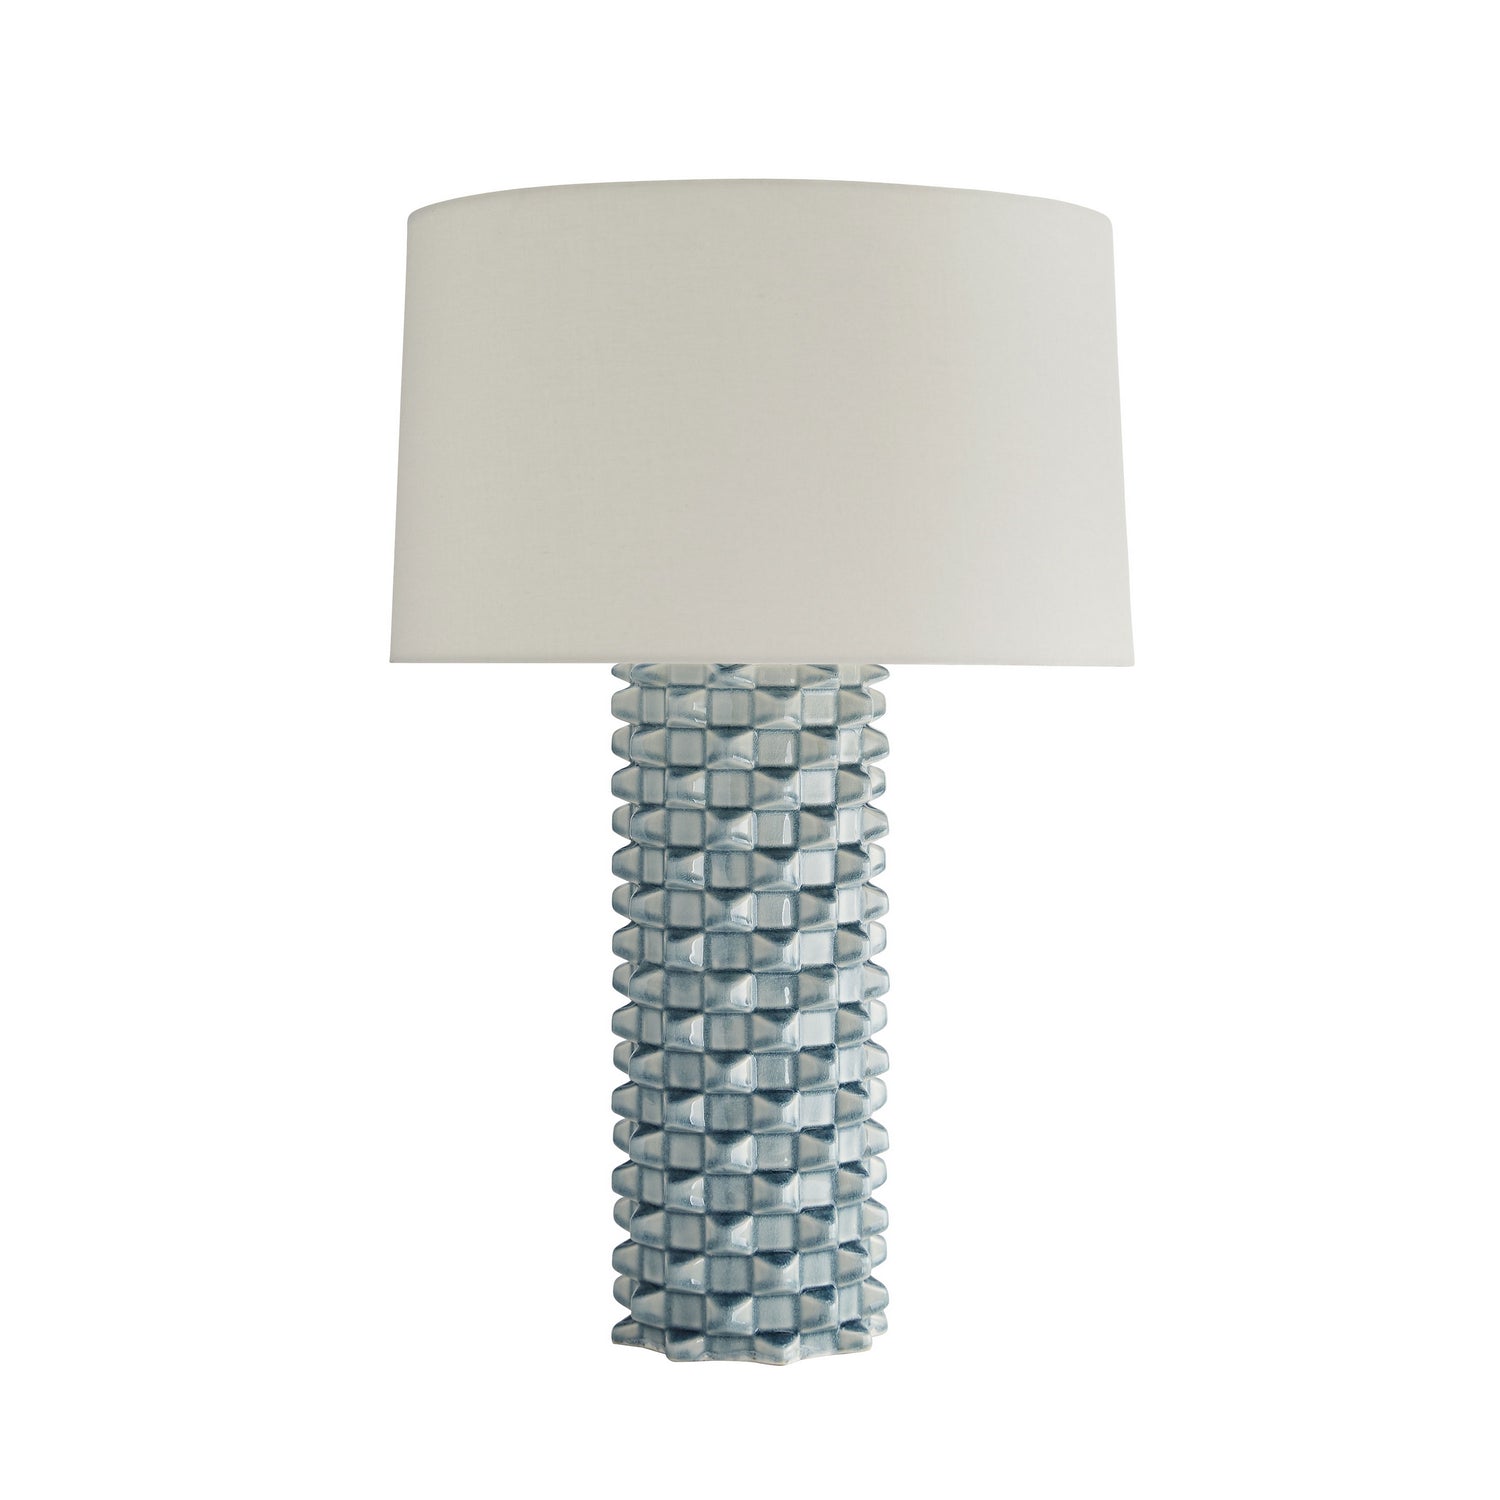 One Light Table Lamp from the Ari collection in Celadon Crackle finish